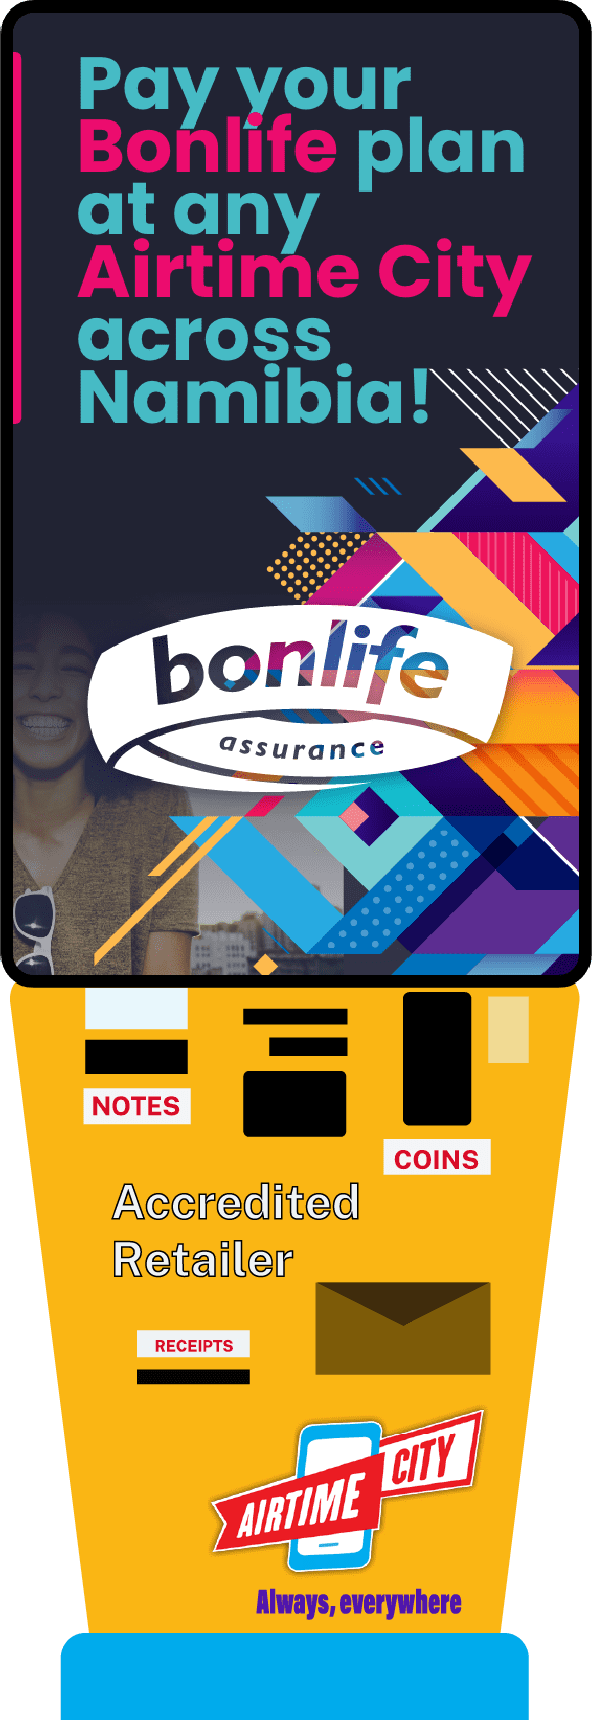 Bonlife Assurance | Namibia How to pay